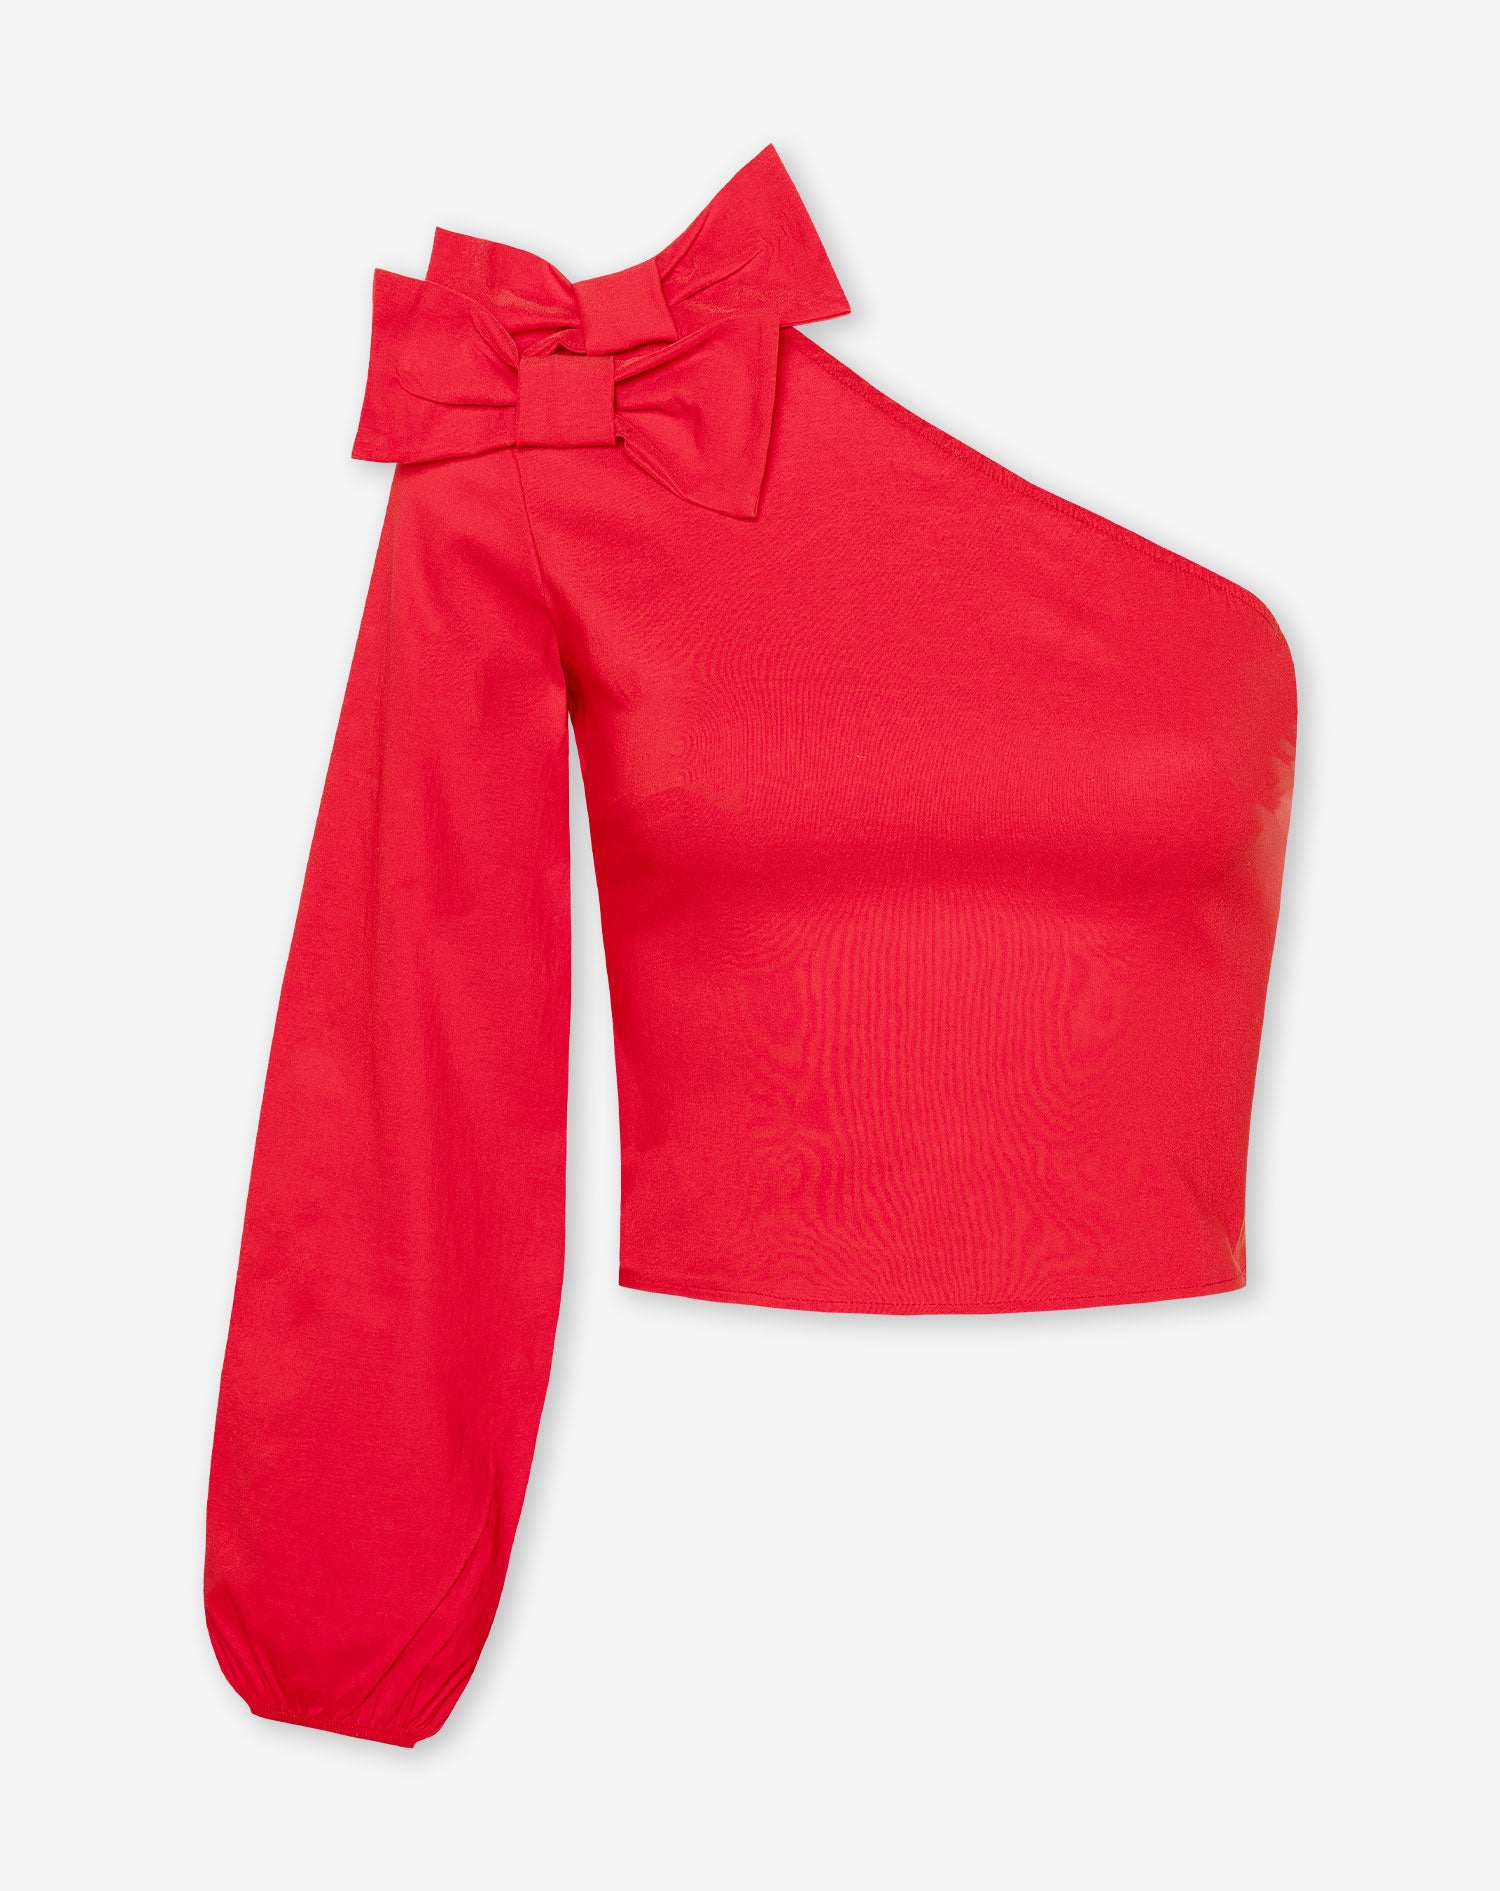 ONE SLEEVE BOWS TOP RED